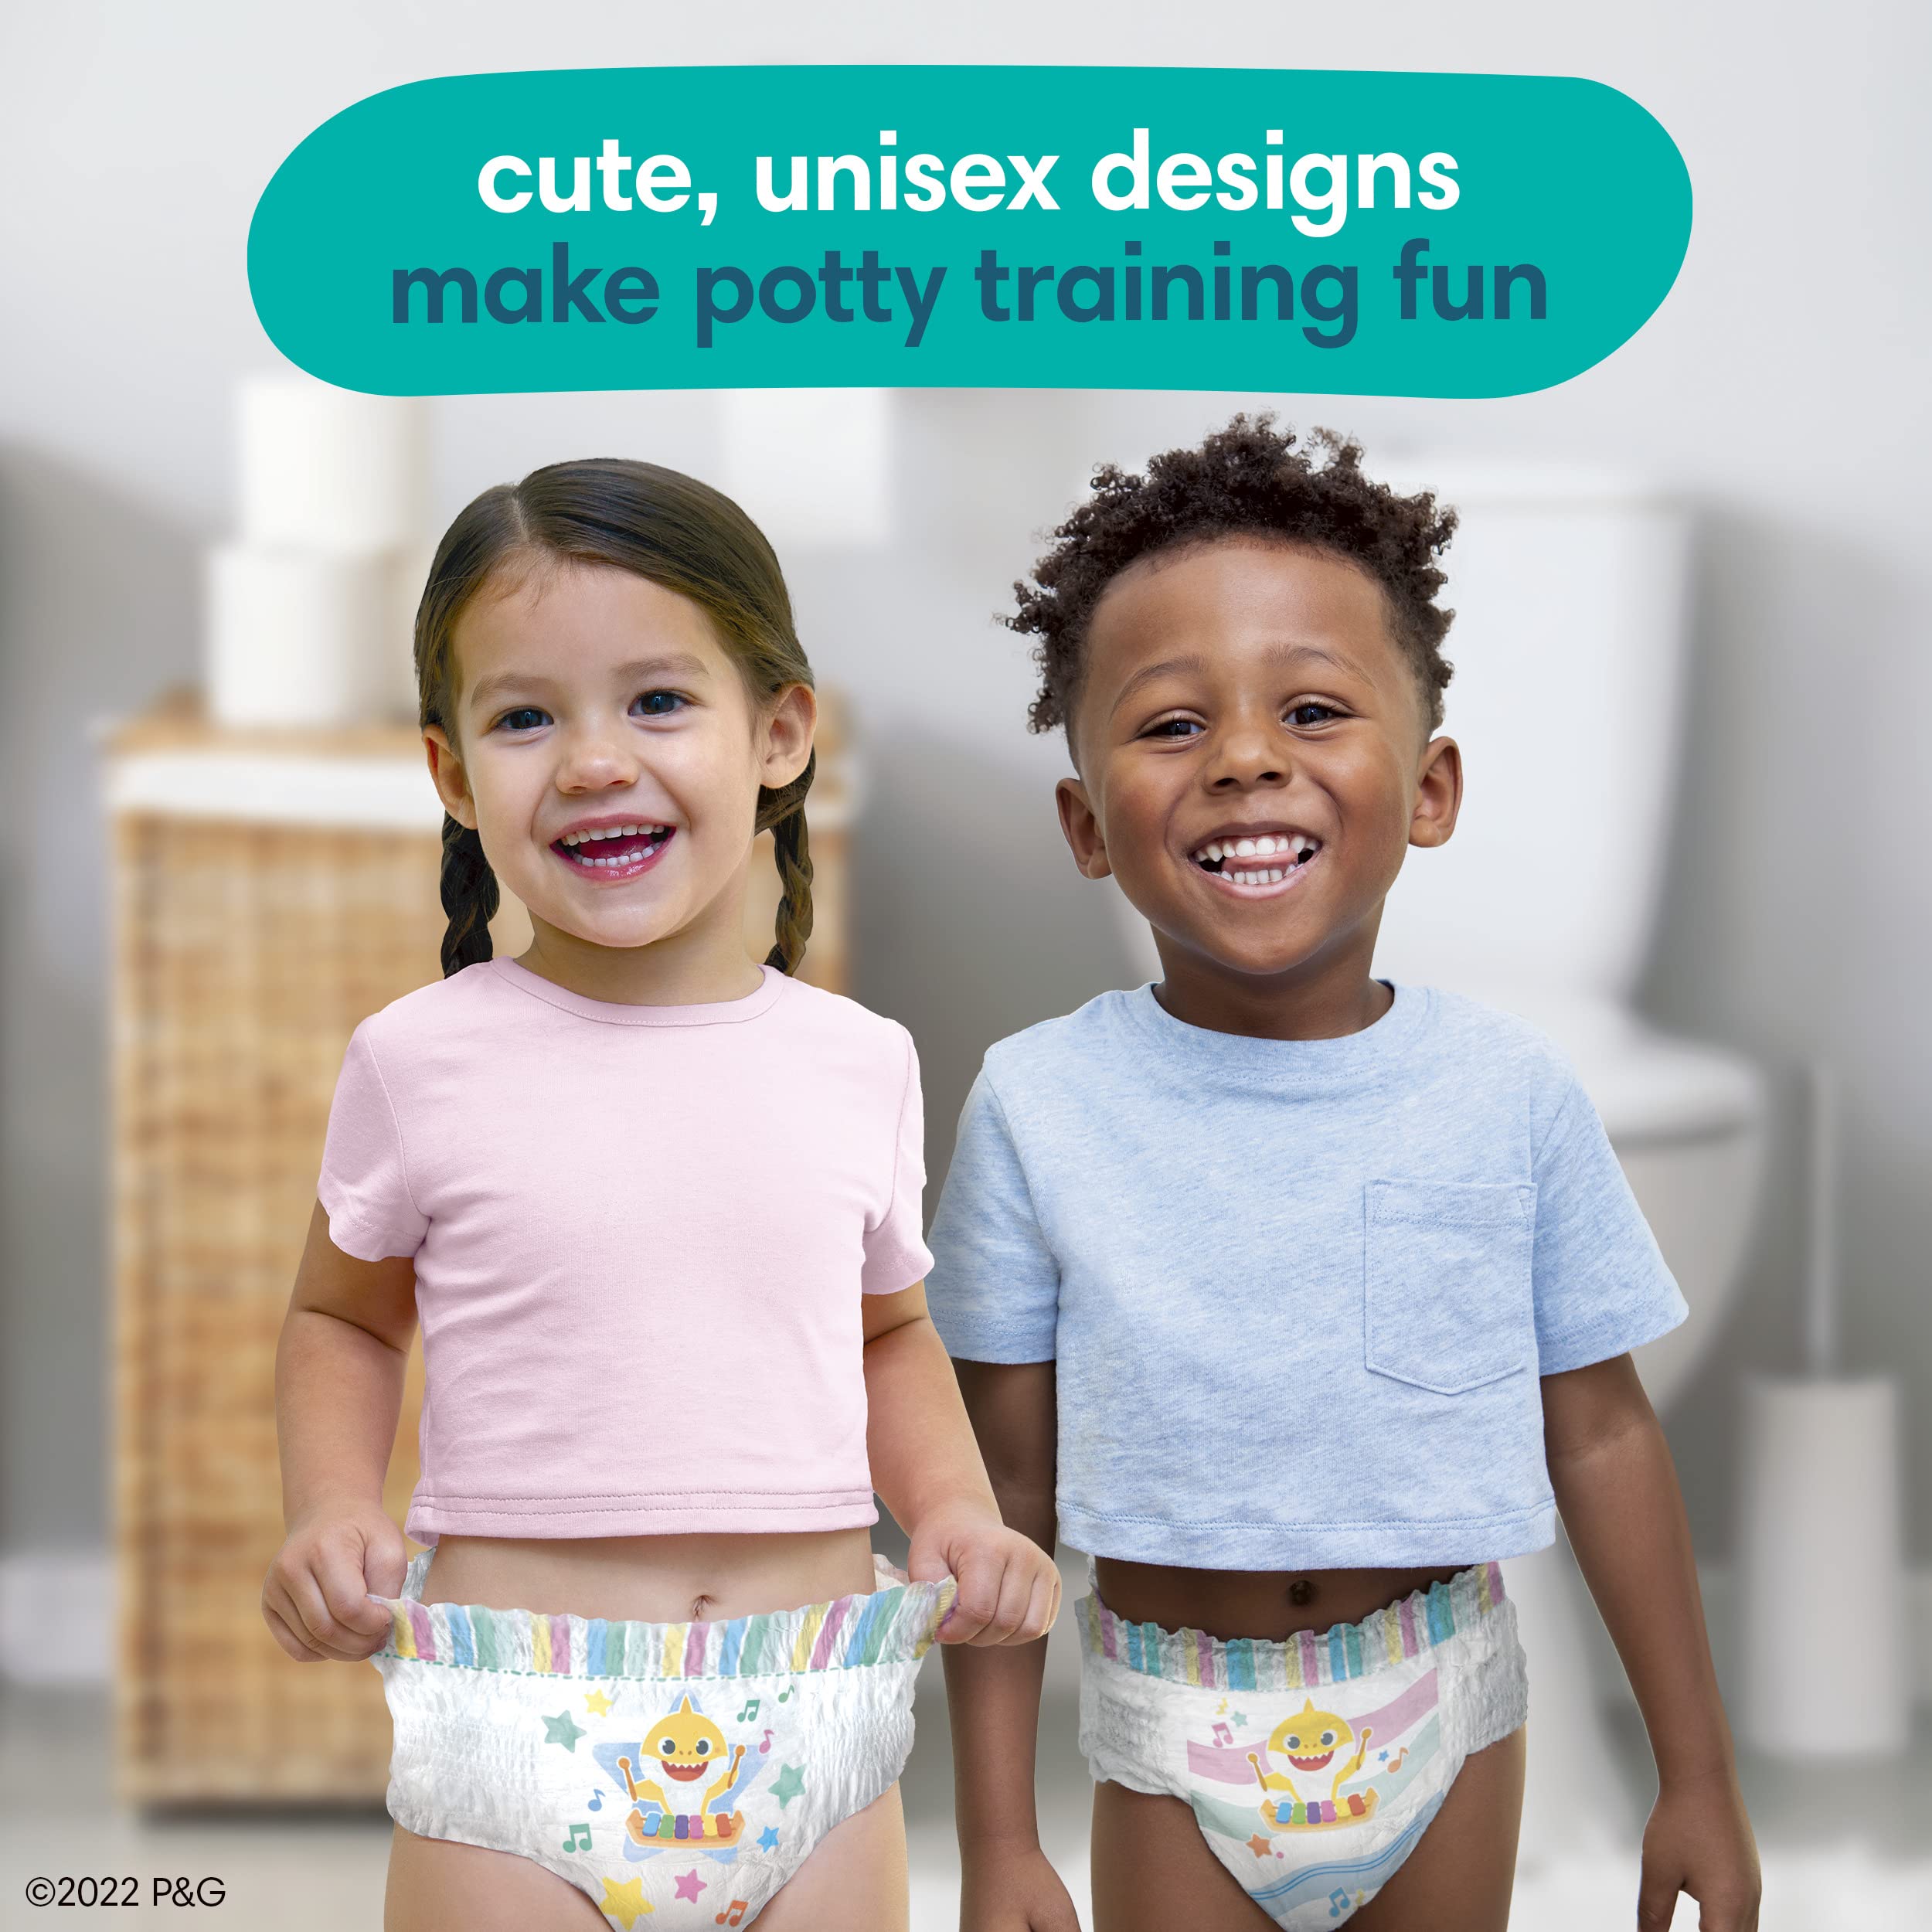 Buy Pampers Pure Protection Training Underwear, Baby Shark, 2T-3T, 60 Count